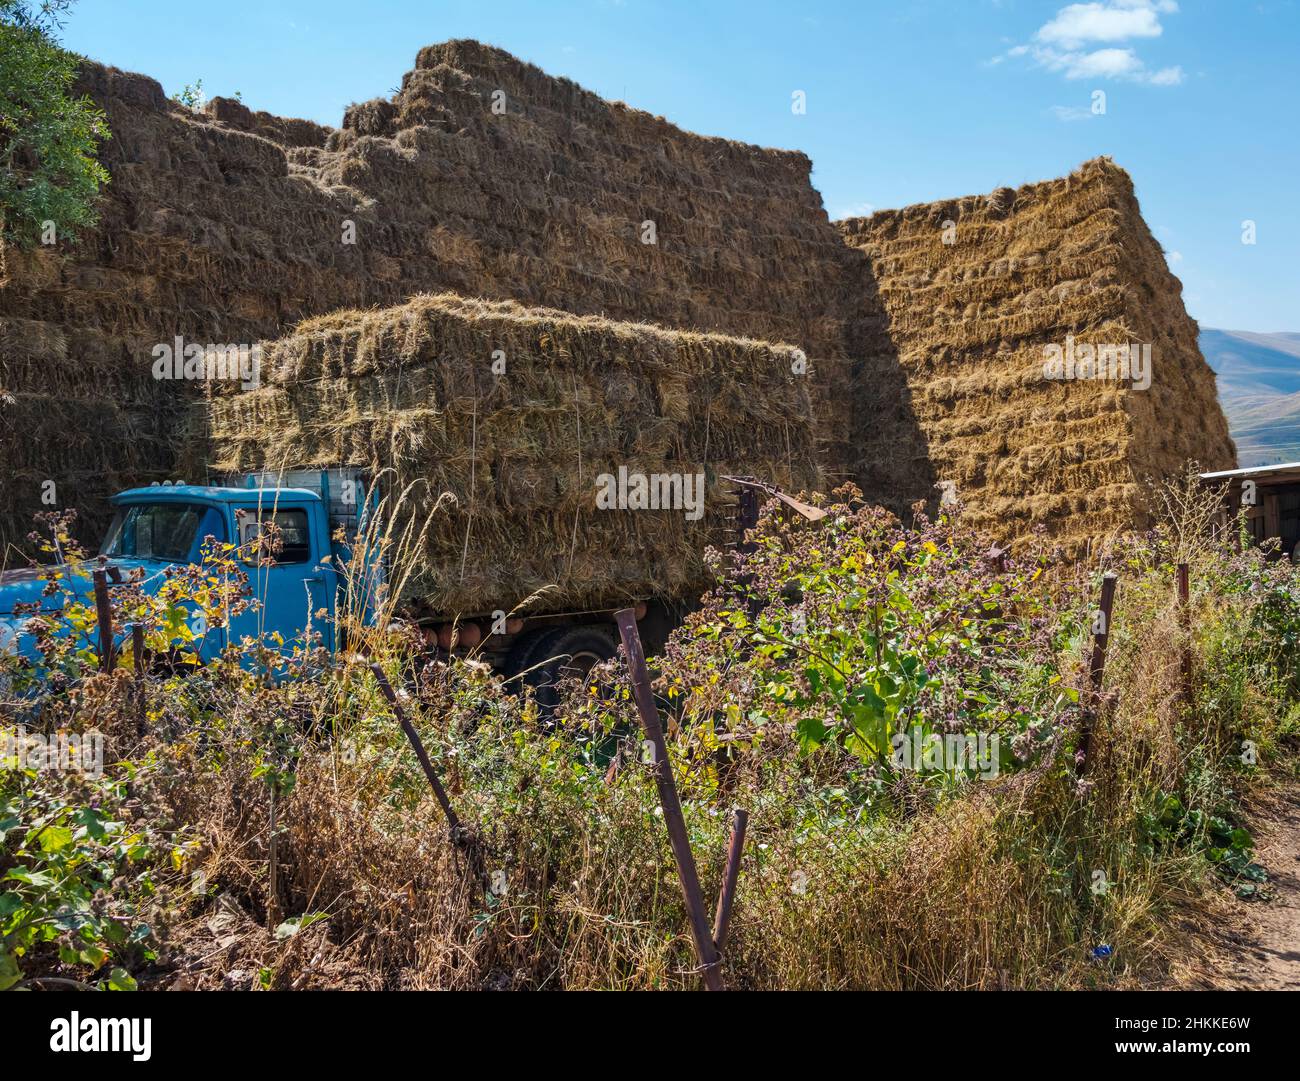 Truck carrying haystack, south Armenia Stock Photo